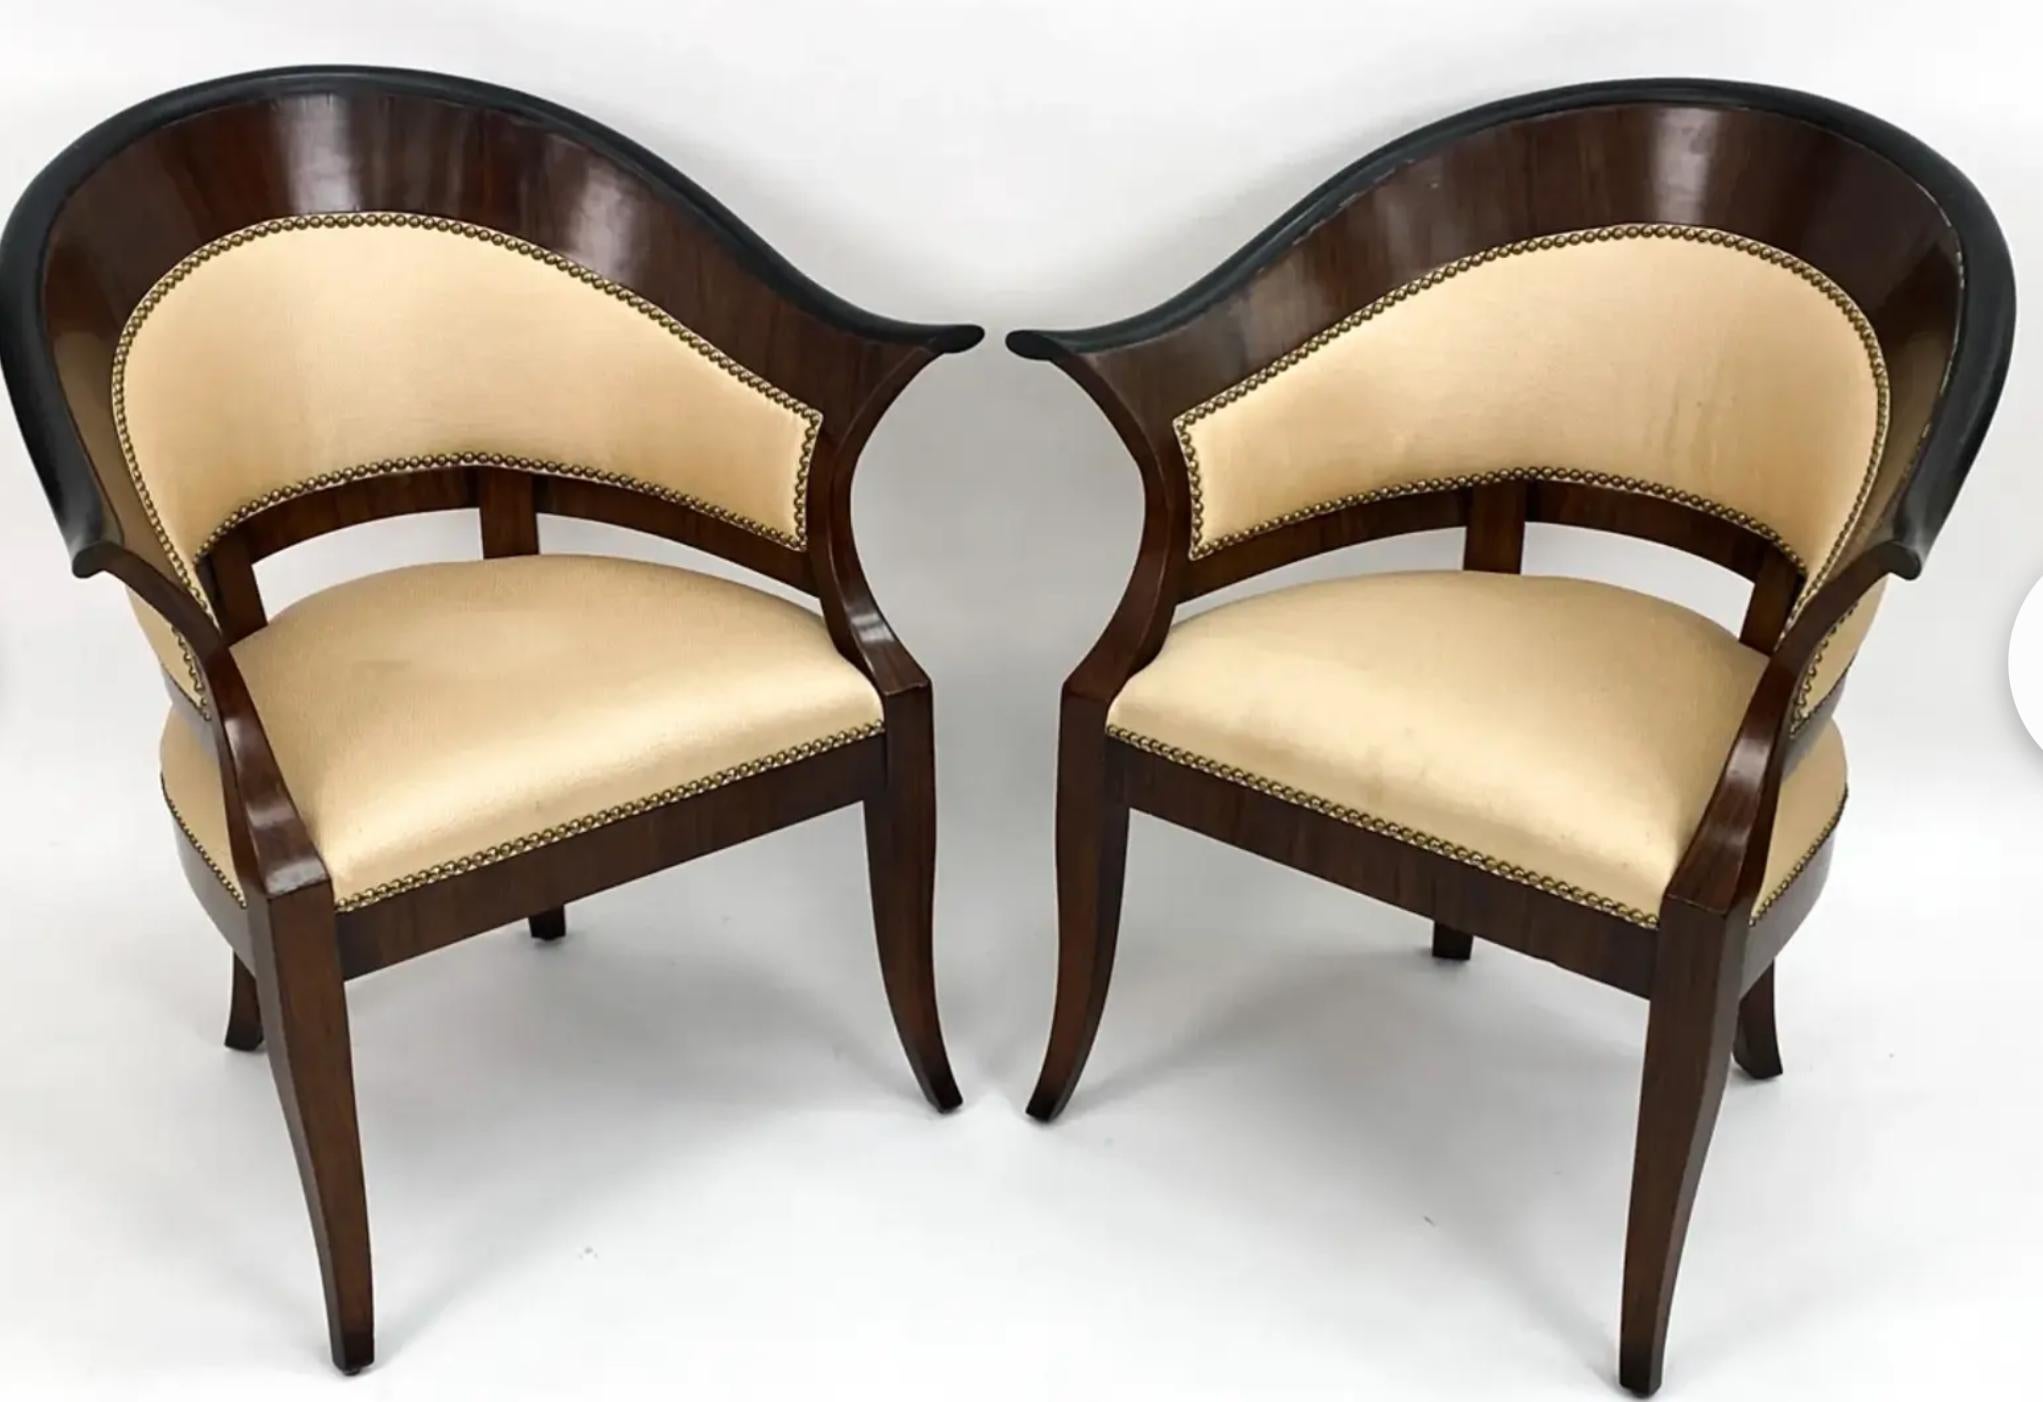 Late 20th Century Pair of William Switzer Biedermeier Style Club Chairs For Sale